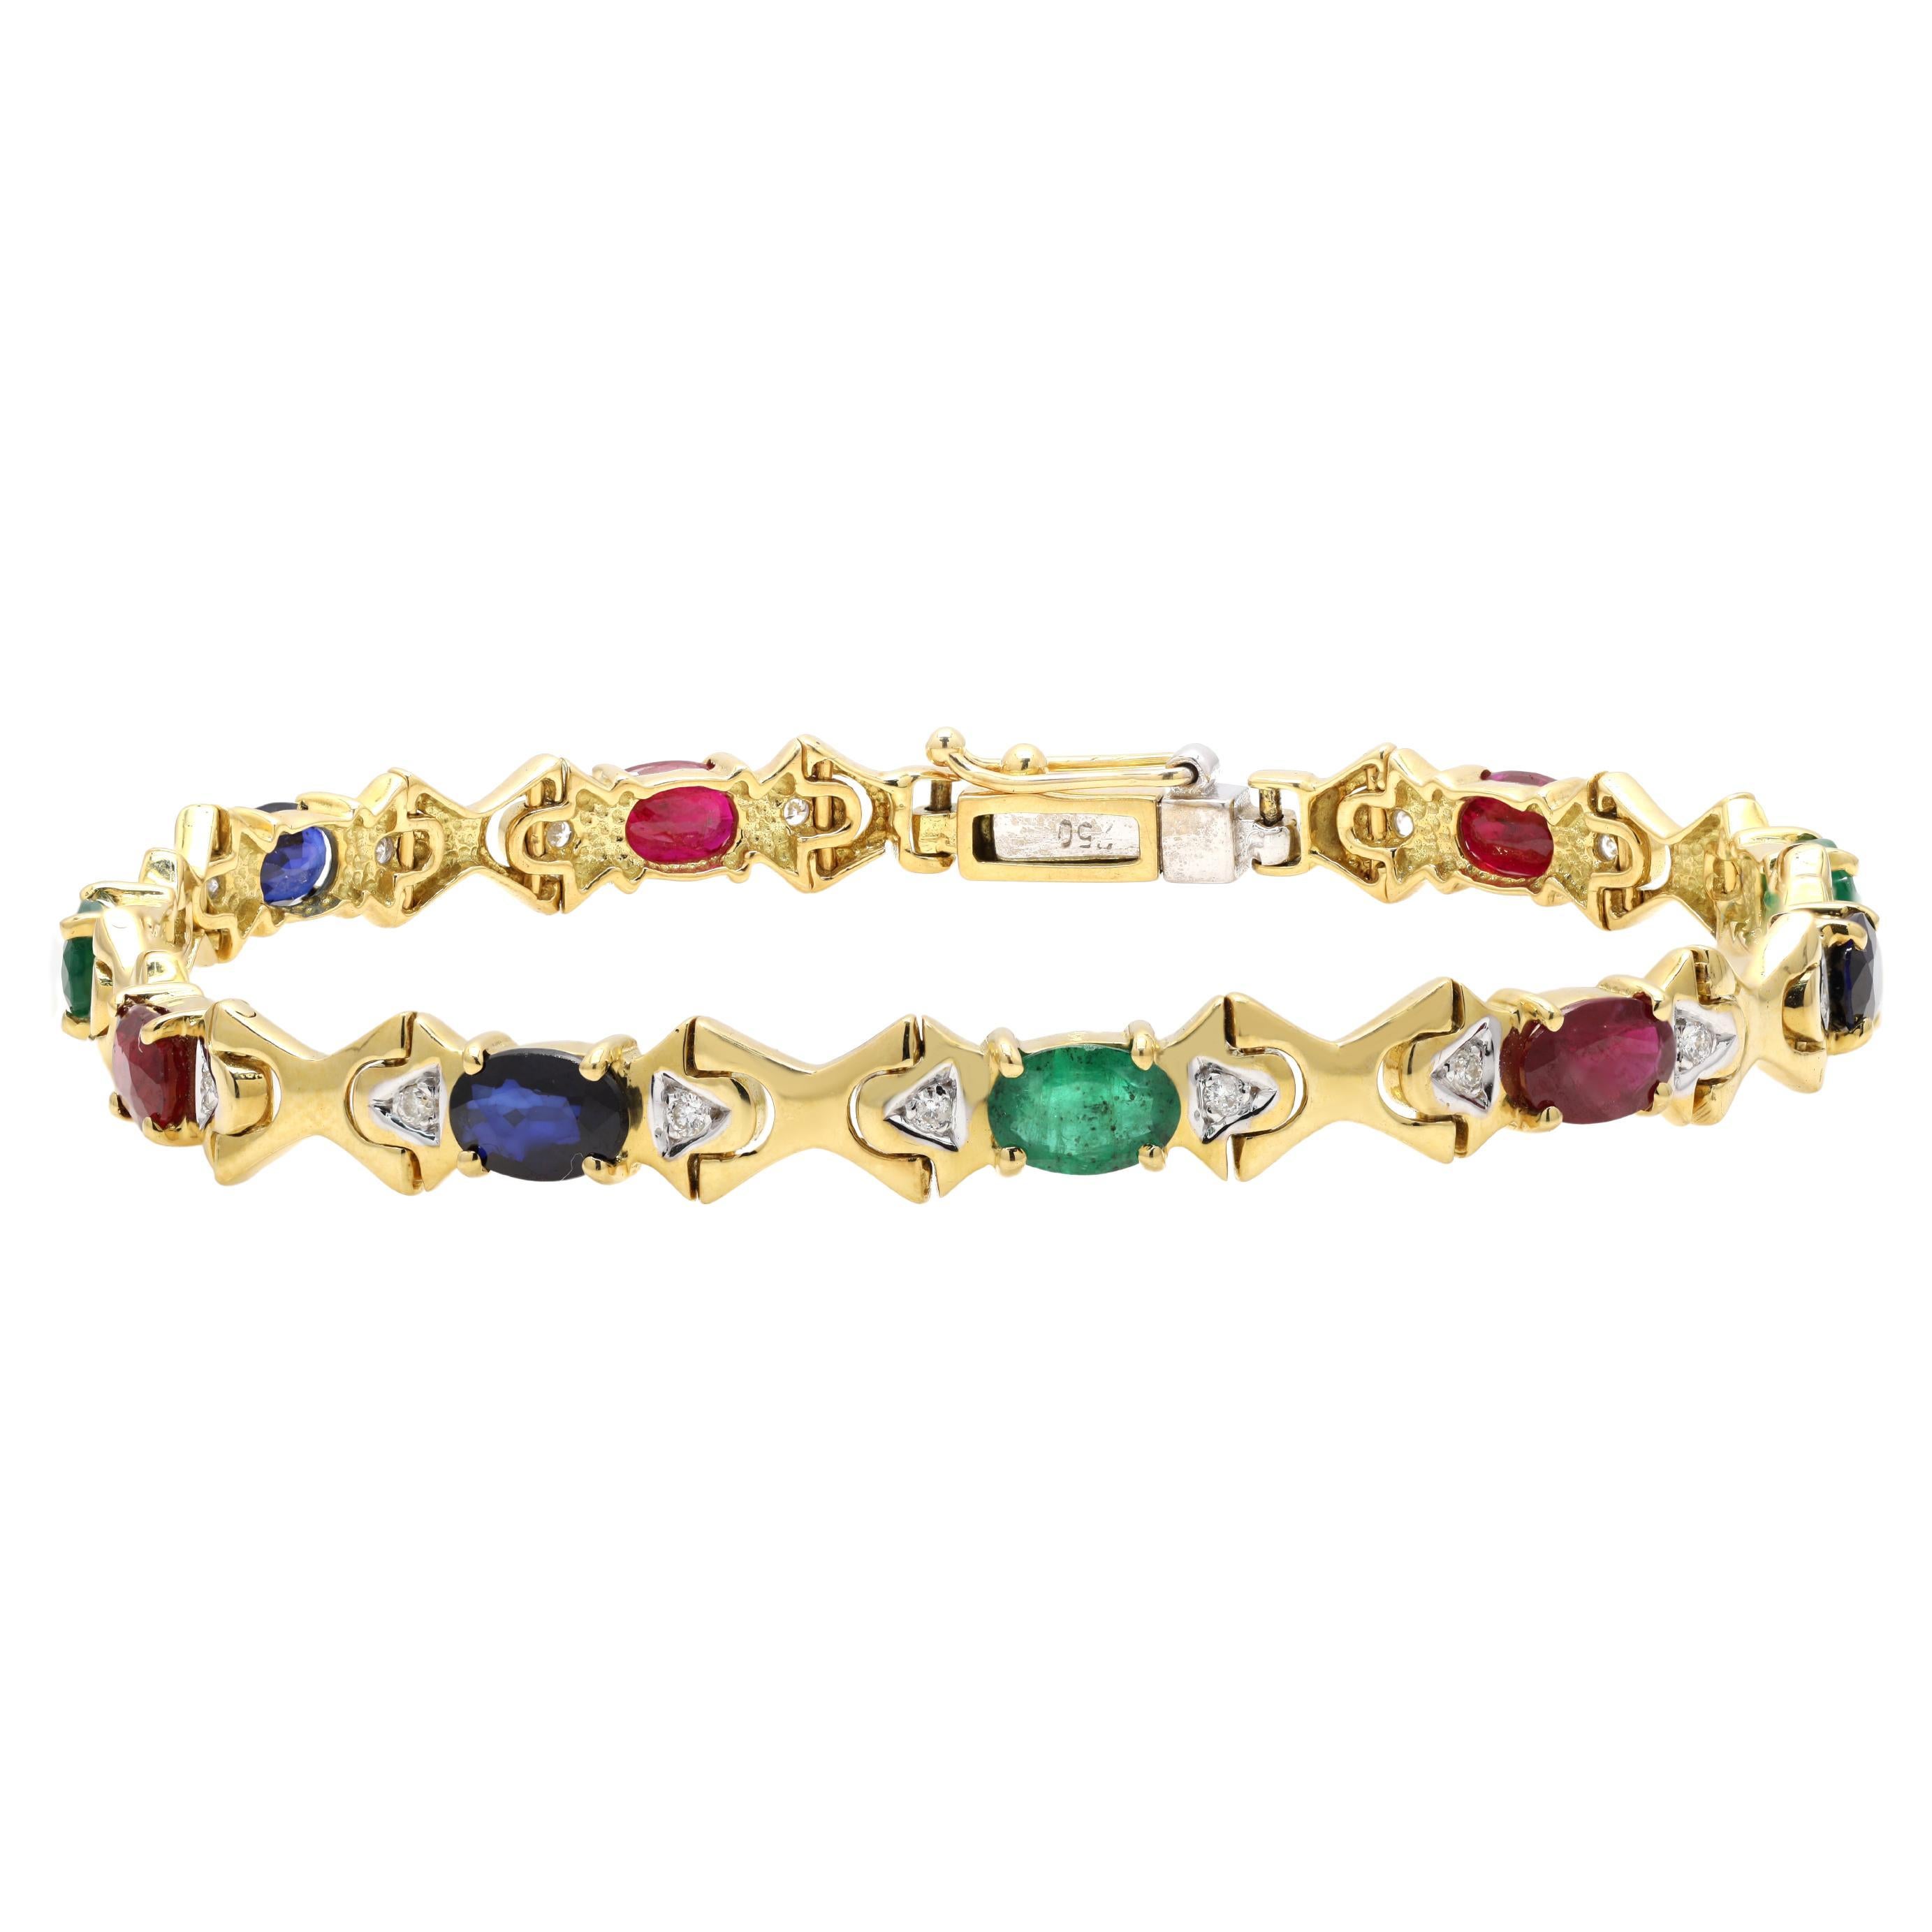 Natural Emerald, Ruby, Sapphire Solid 18K Gold Tennis Bracelet with Diamonds